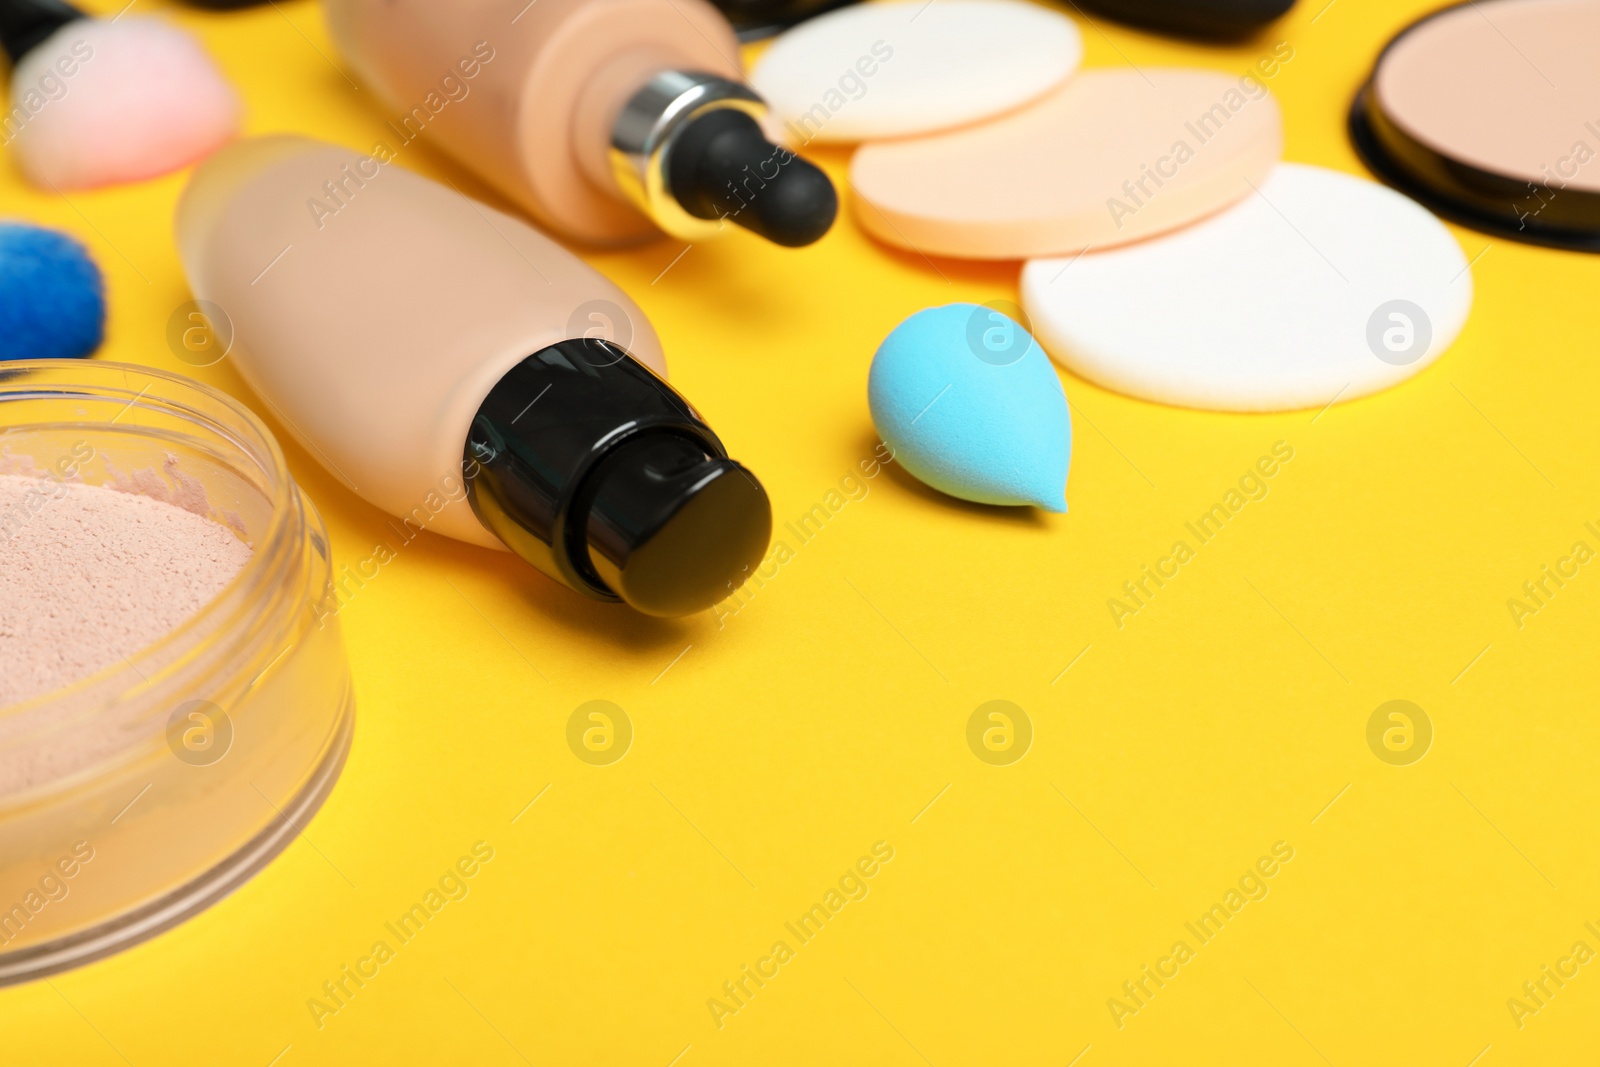 Photo of Composition with skin foundation, powder and beauty accessories on color background